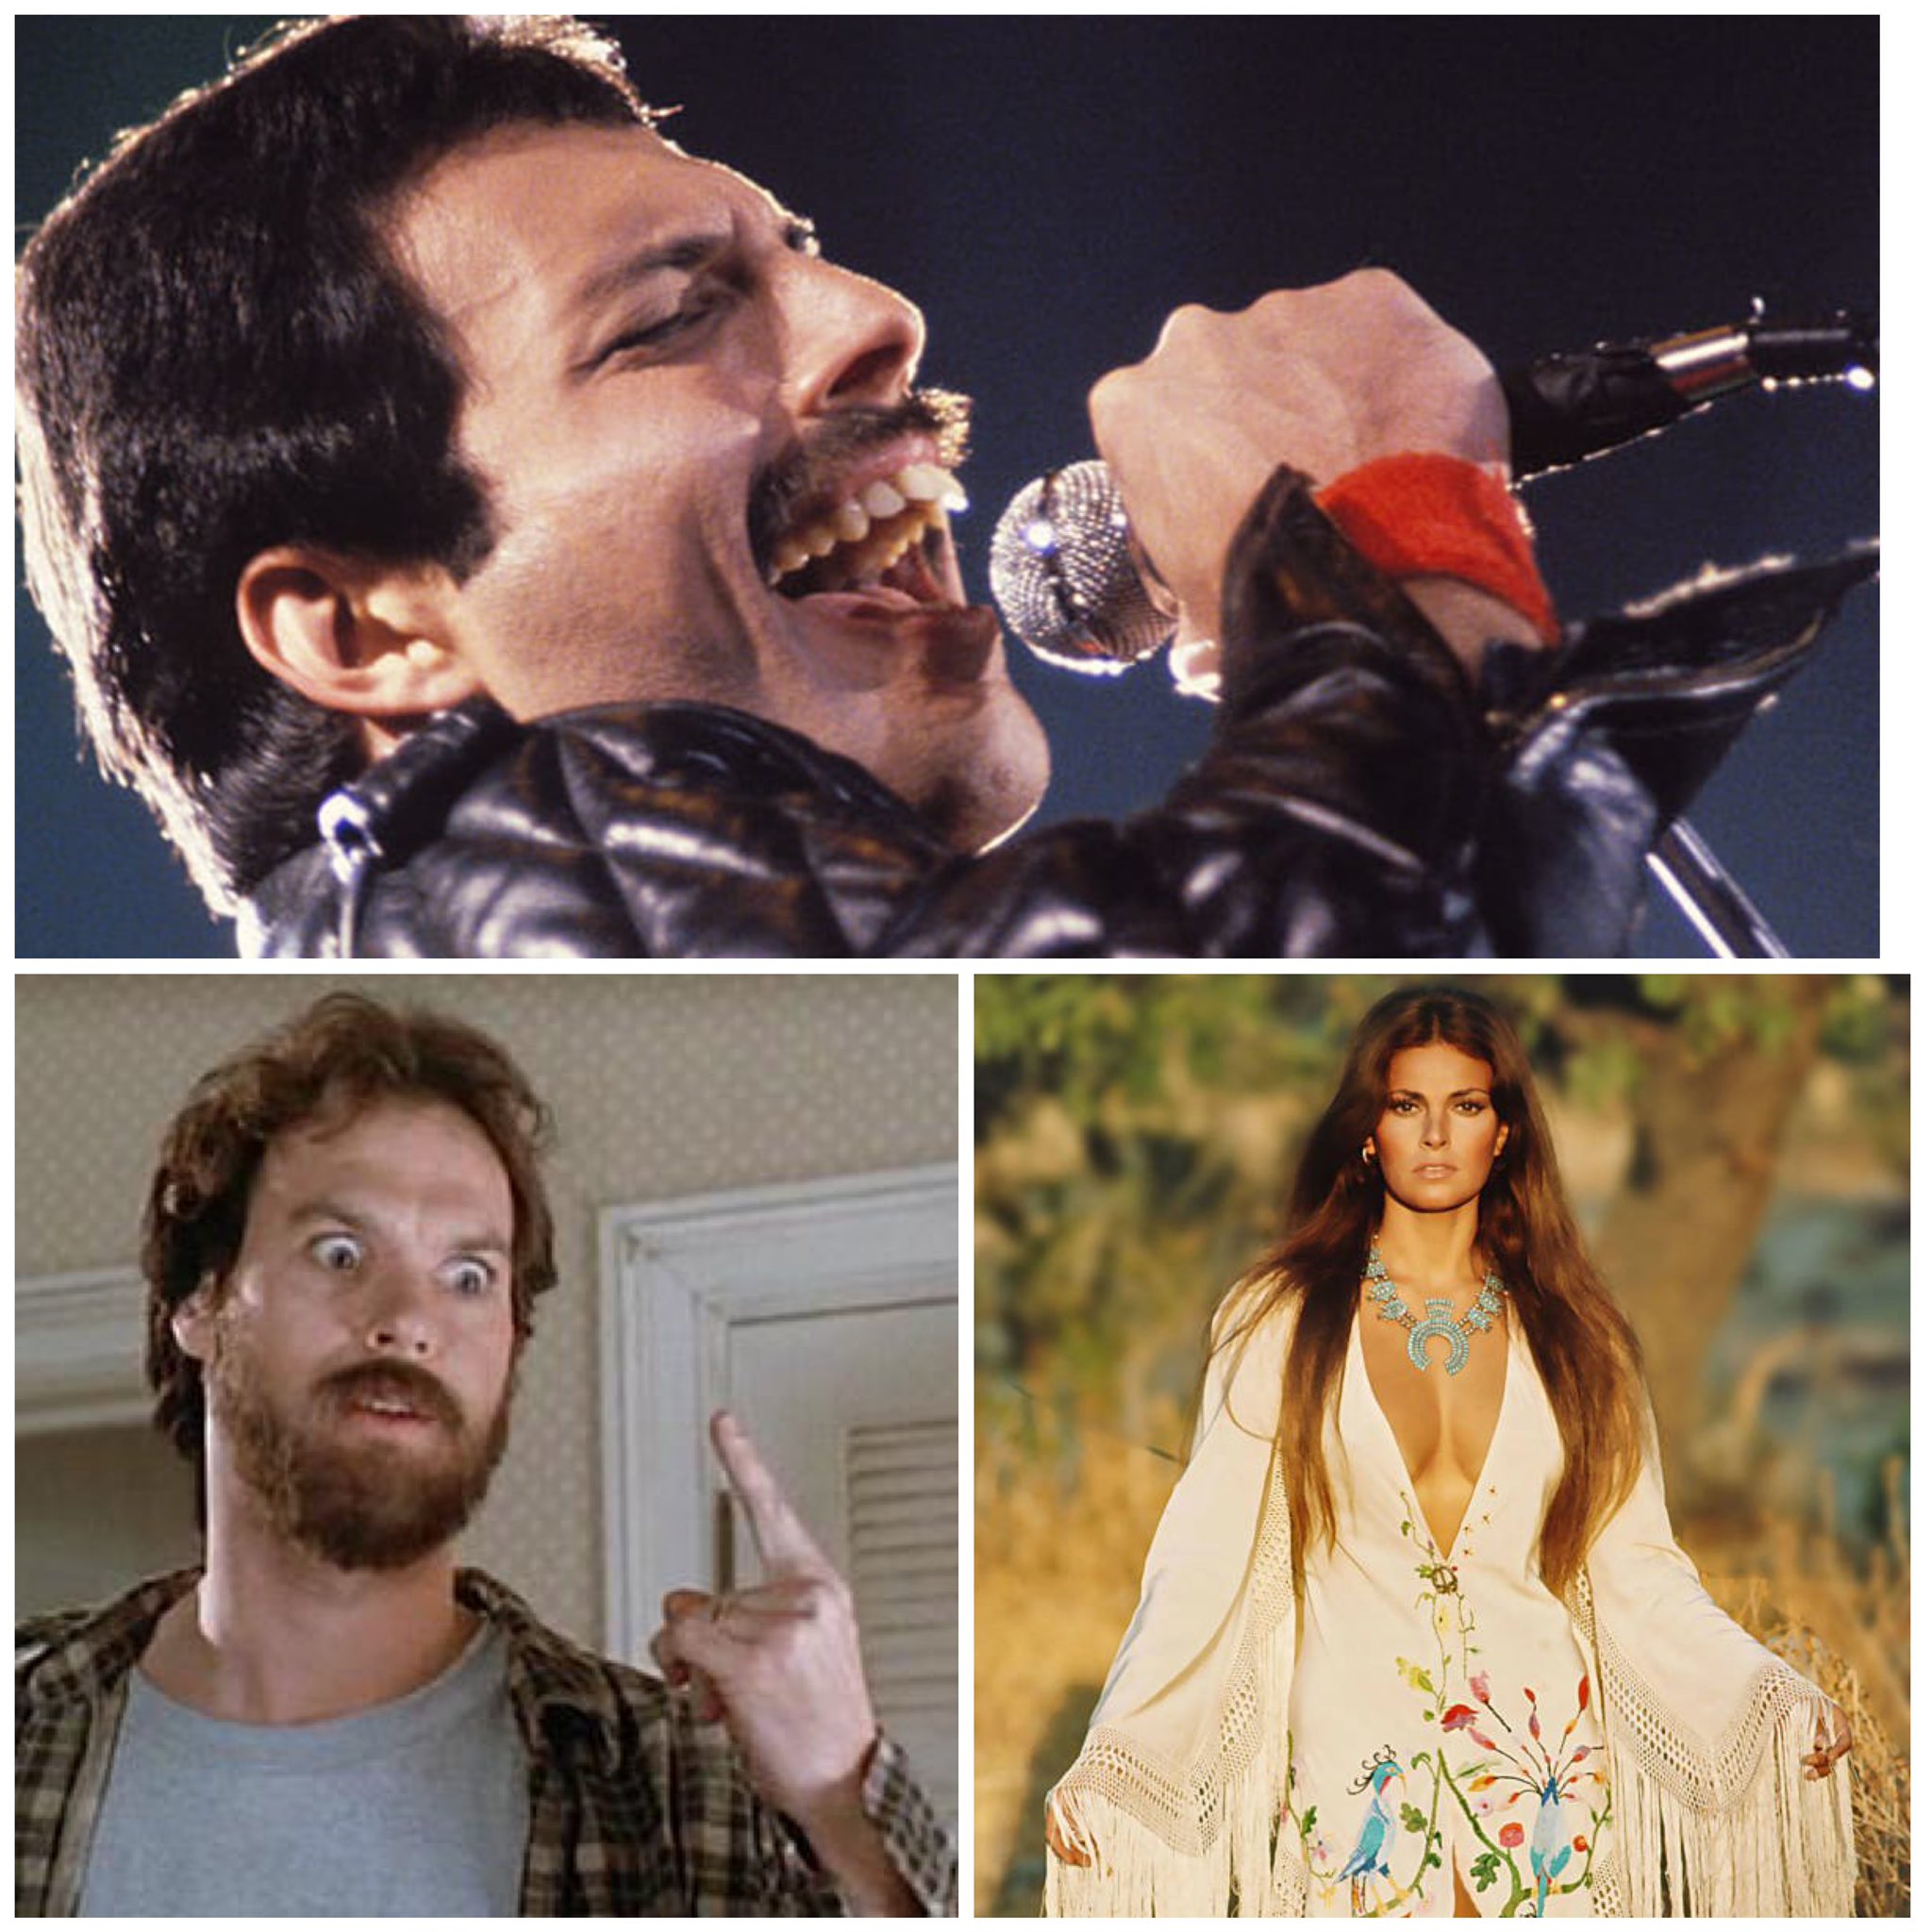 Happy Birthday to 

Raquel Welch 
Michael Keaton 
And the late great Freddie Mercury 